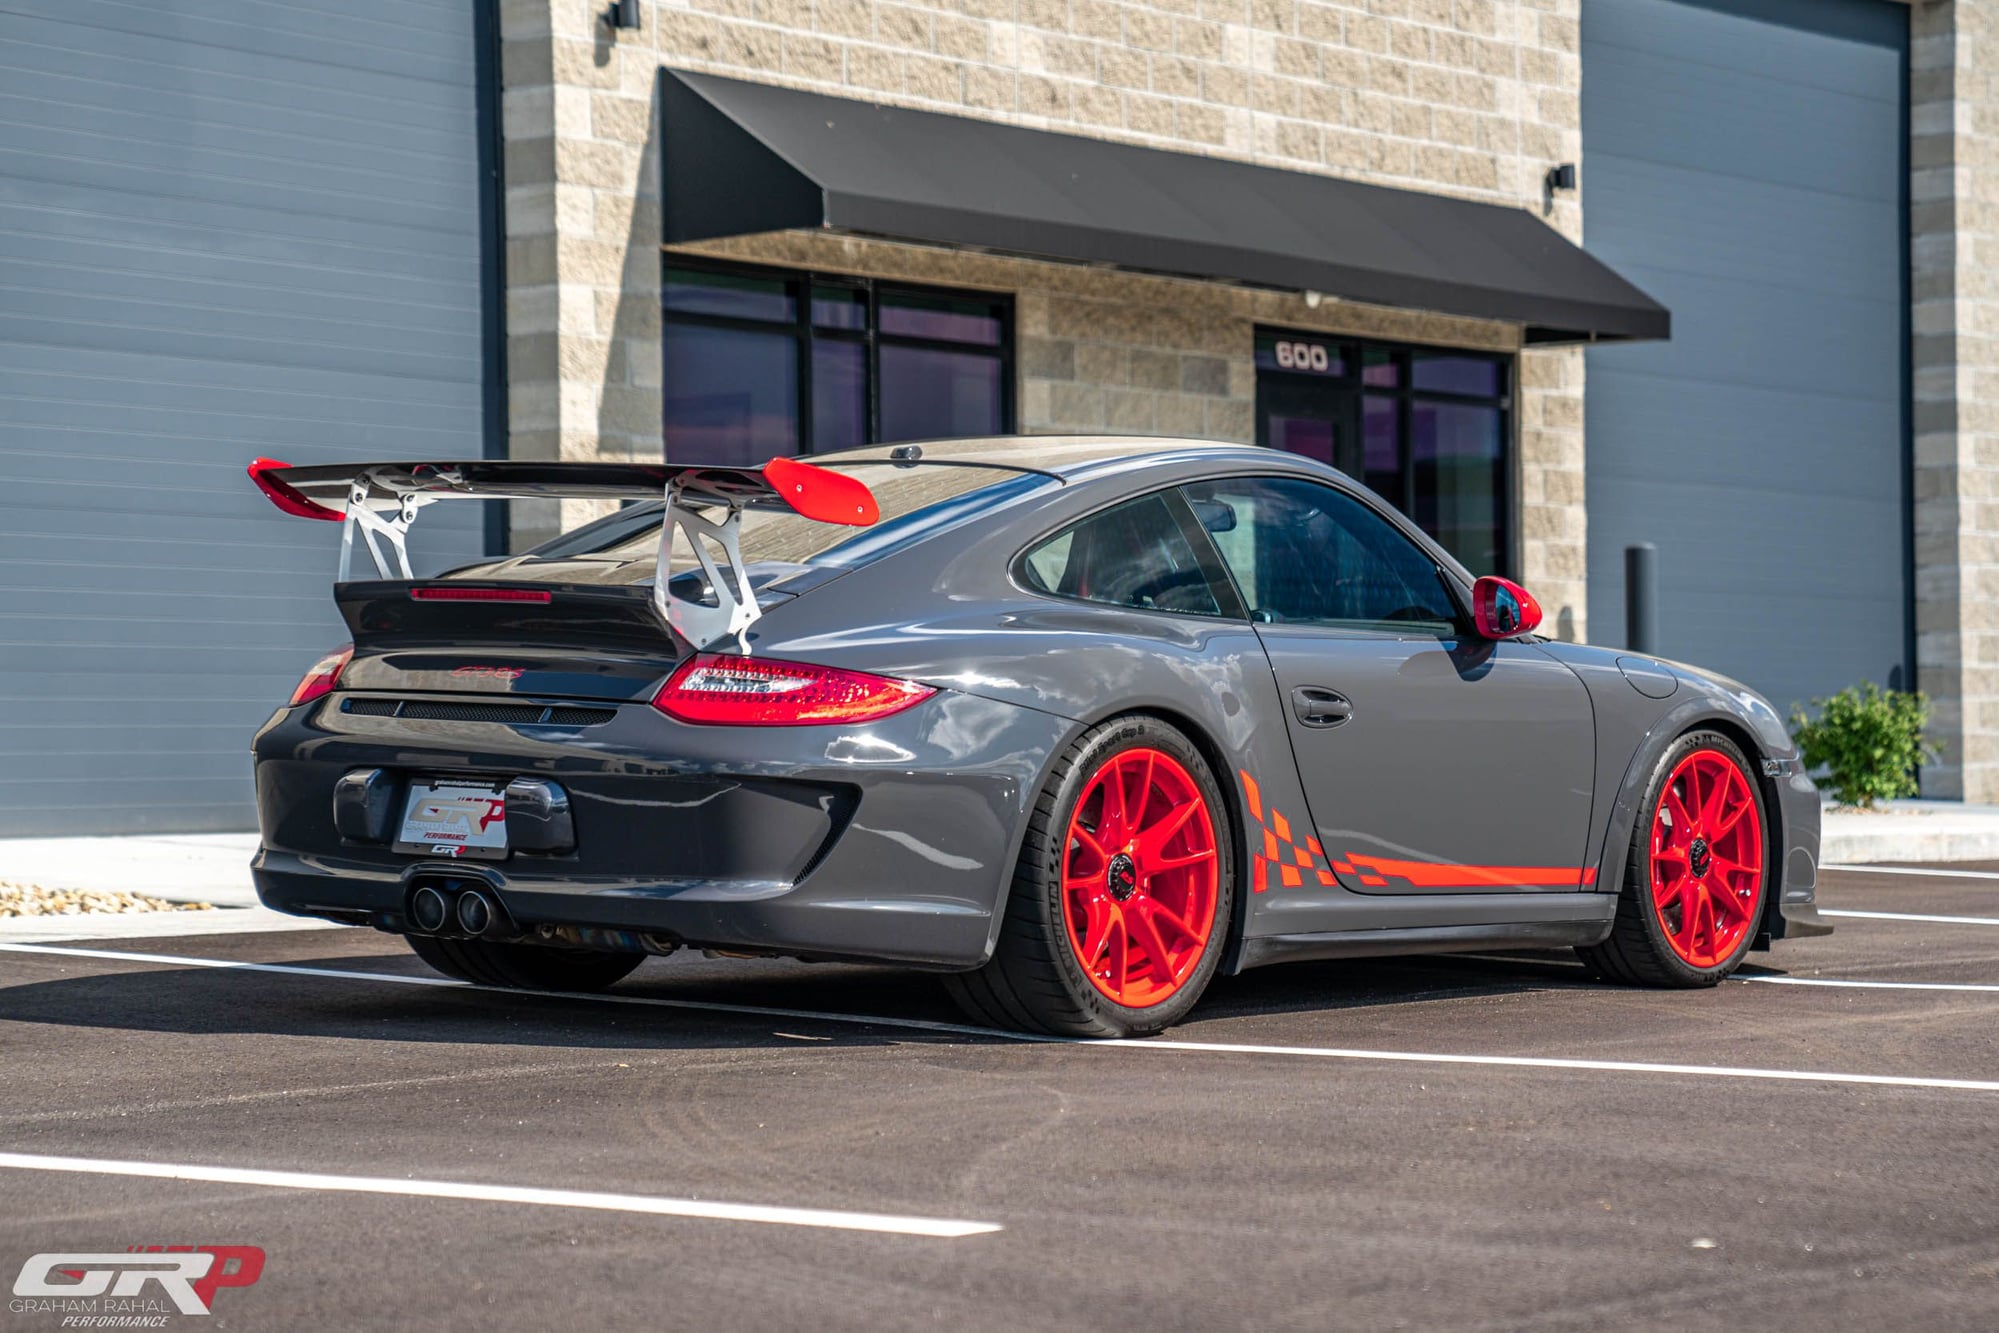 2011 Porsche 911 - 2011 Porsche GT3 RS - Grey Black - Used - VIN WP0AC2A95BS783098 - 23,513 Miles - 6 cyl - 2WD - Manual - Coupe - Gray - Brownsburg, IN 46112, United States